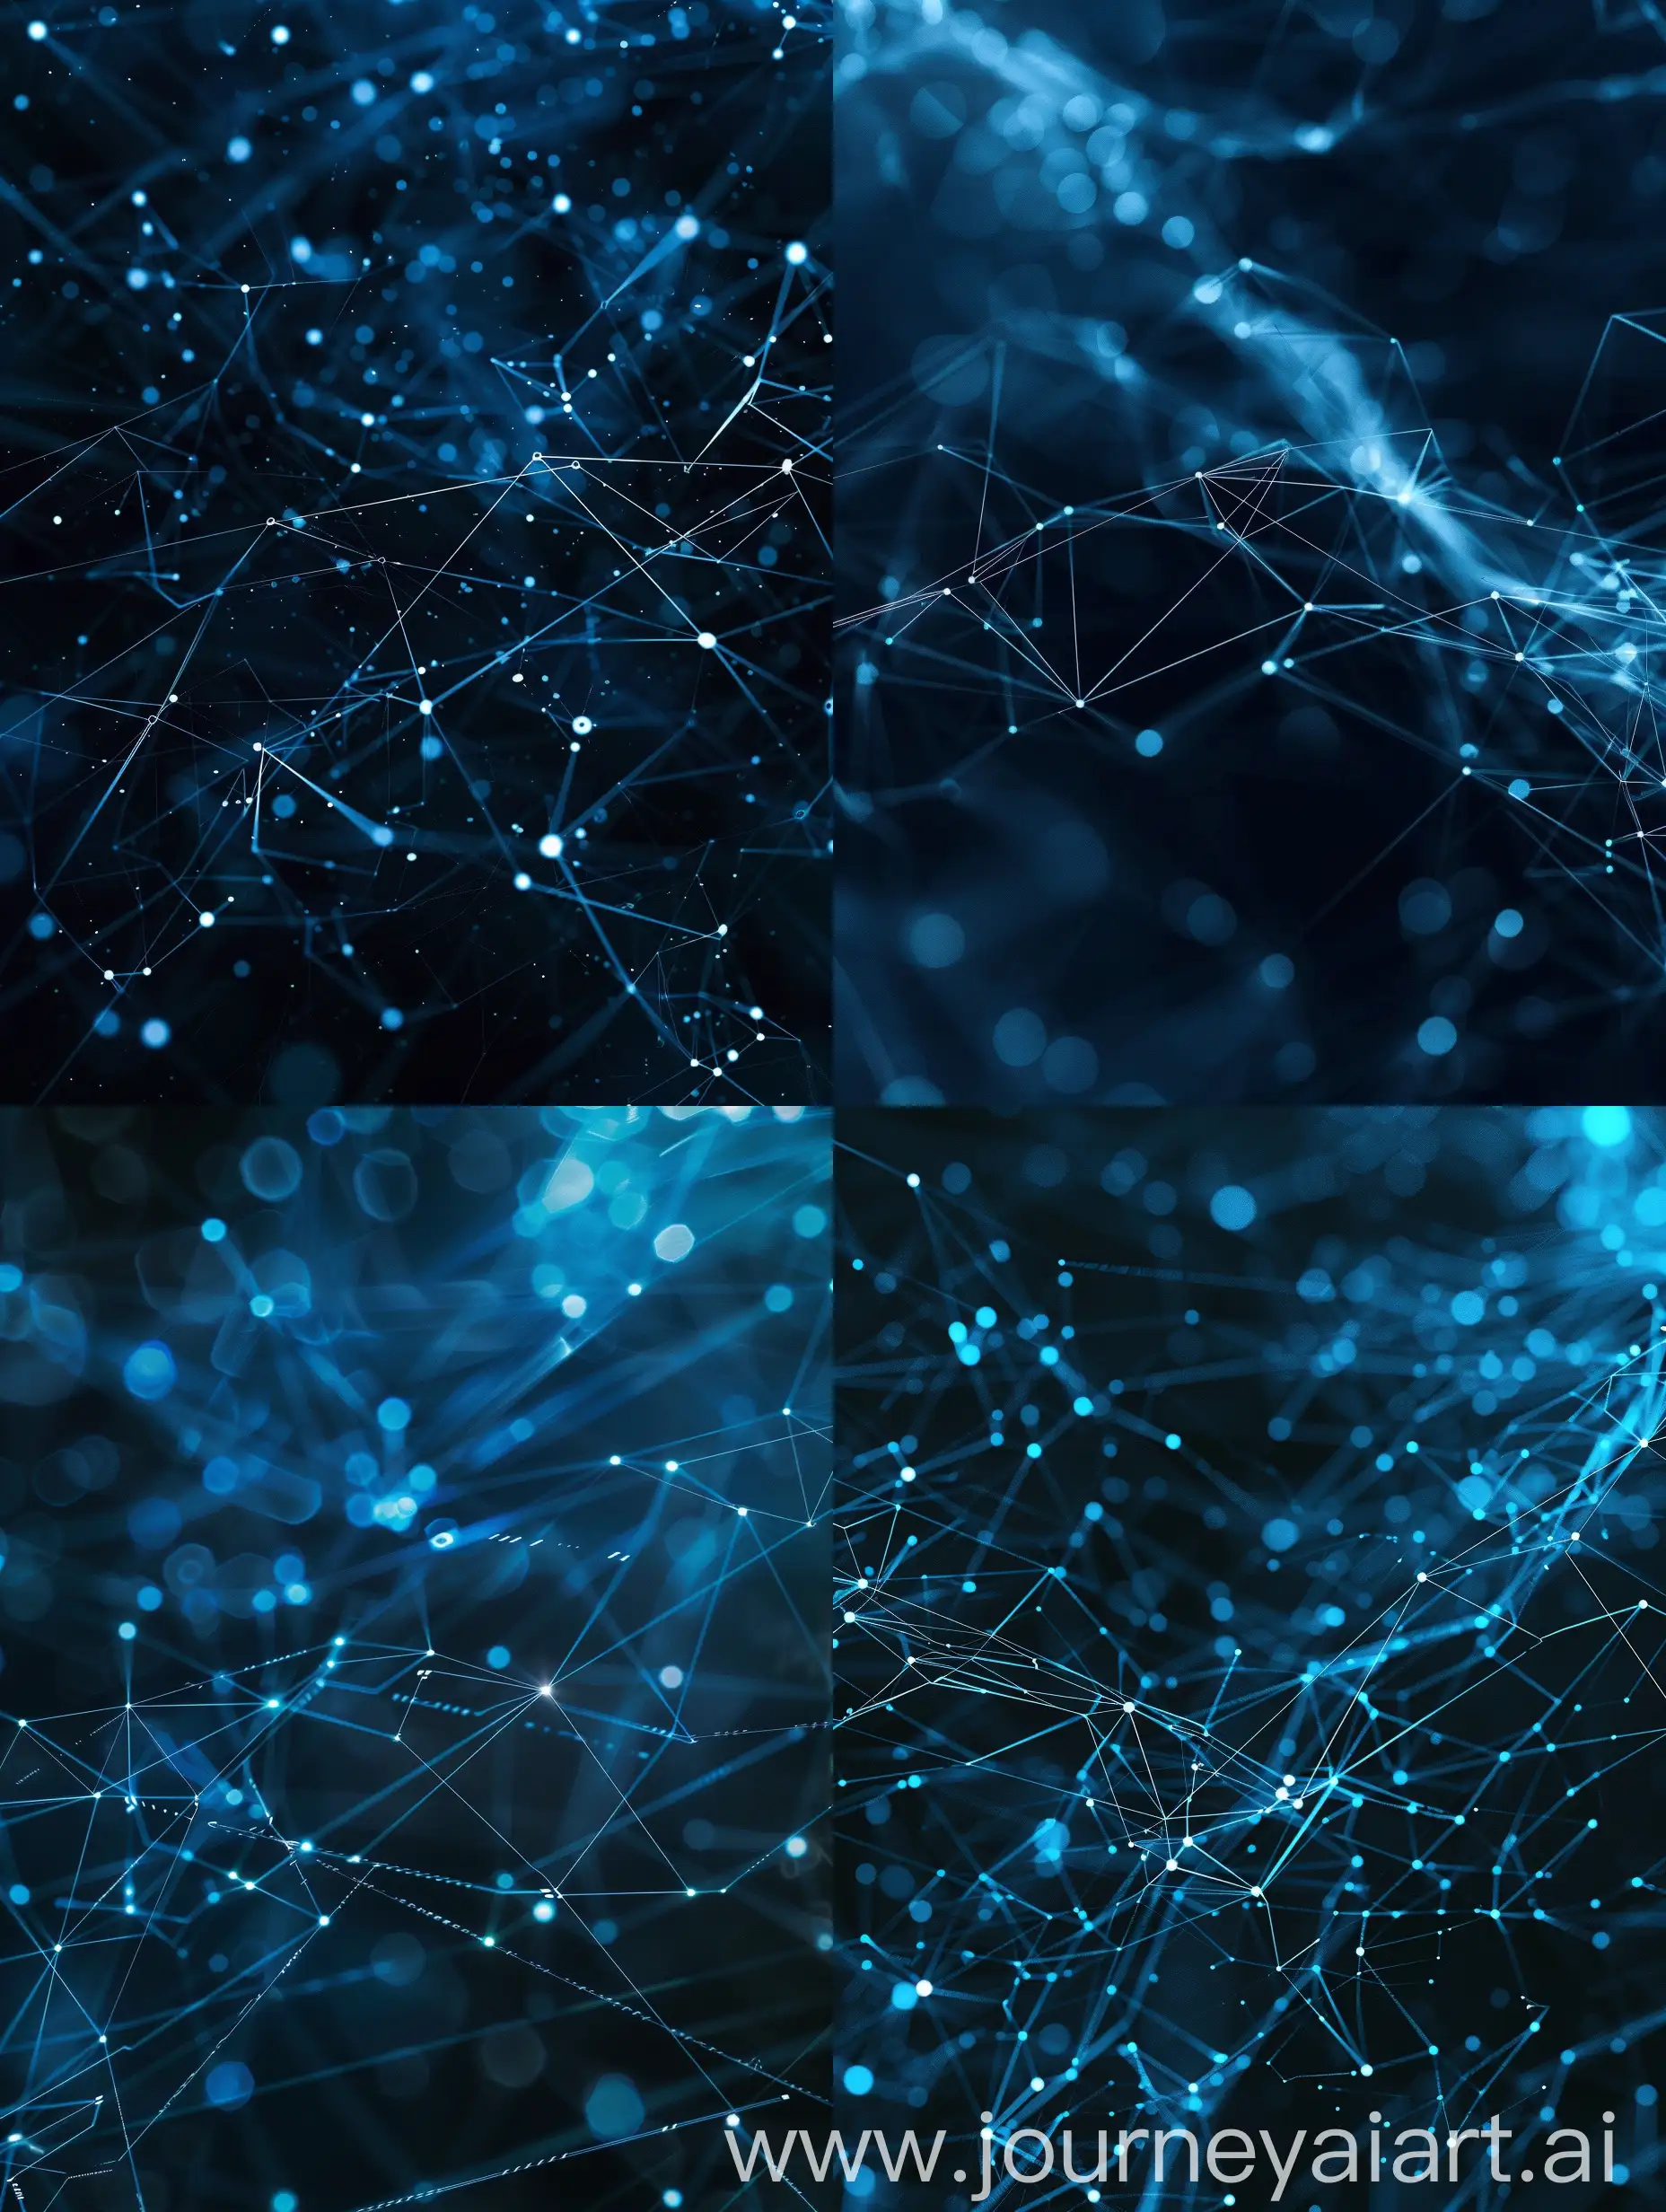 Futuristic-Blue-Network-Illuminated-Technical-Structure-on-Solid-Black-Background